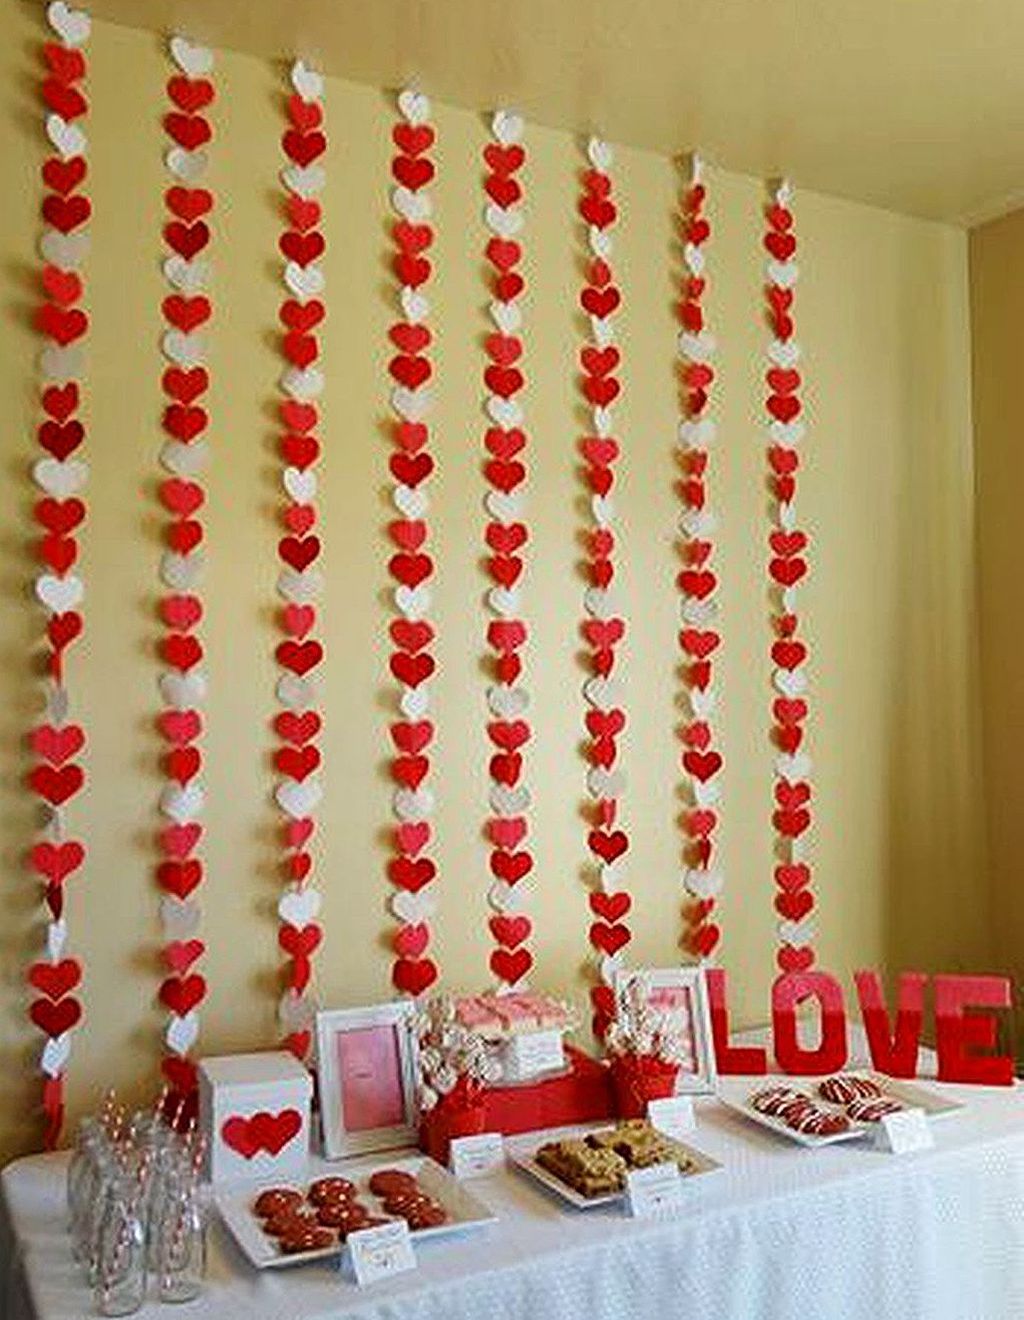 Gorgeous Valentine Wall Decor To Beautify Your Home 03 - MAGZHOUSE